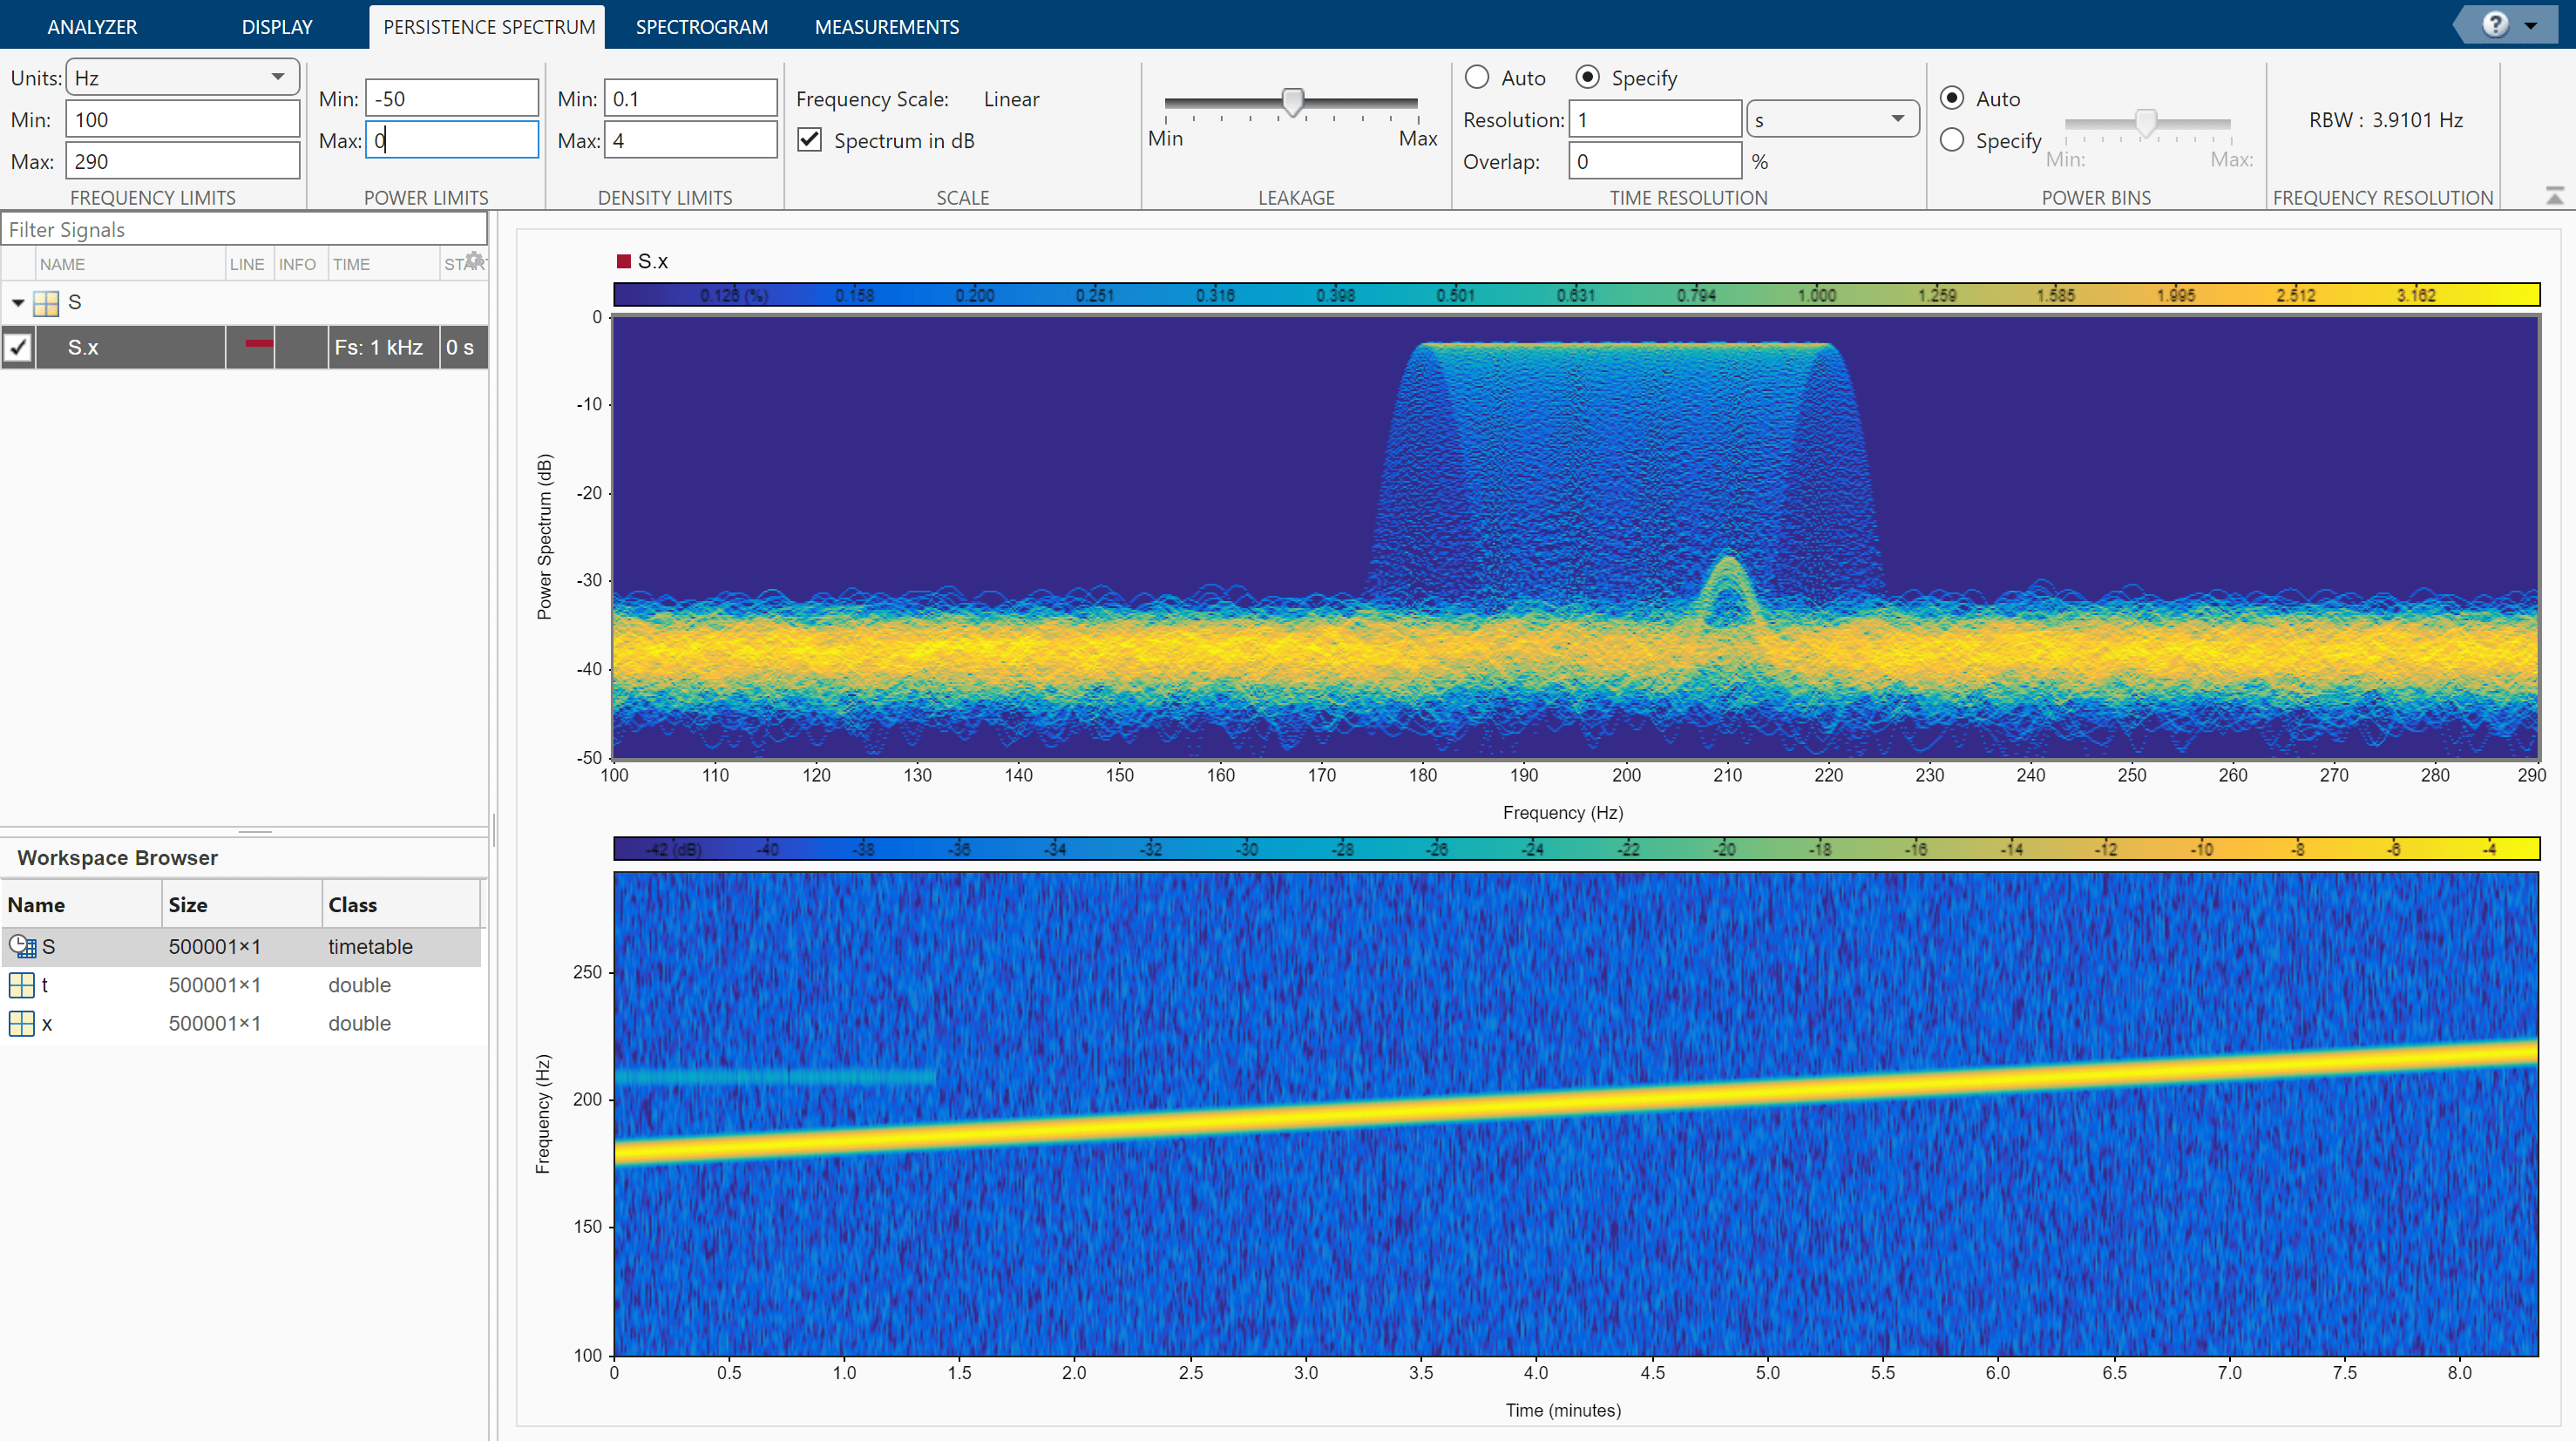 Find Interference Using Persistence Spectrum